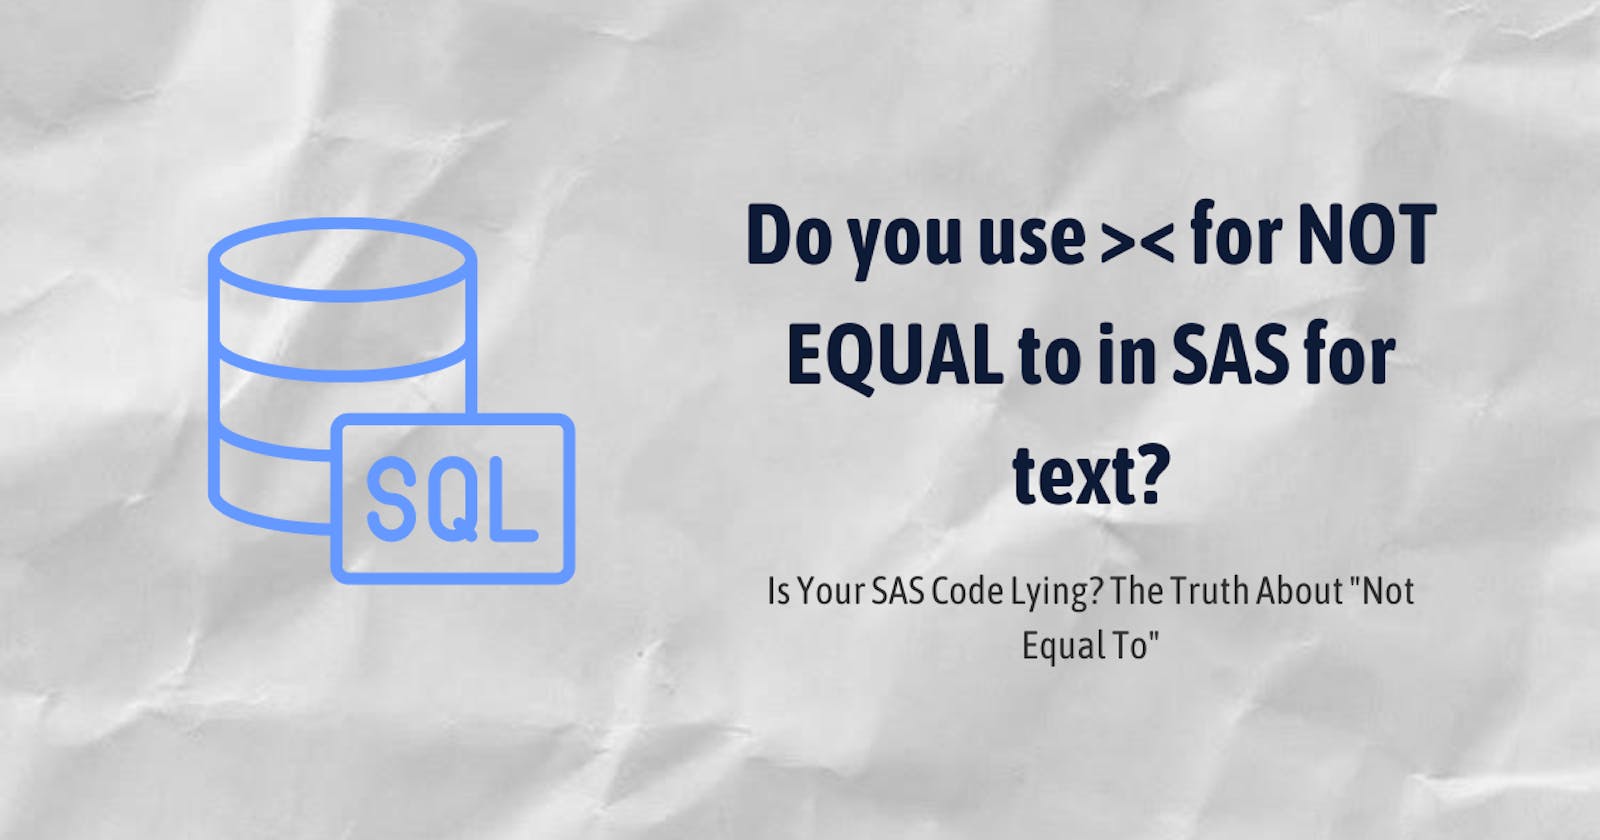 Do you use >< for NOT EQUAL to in SAS for text?